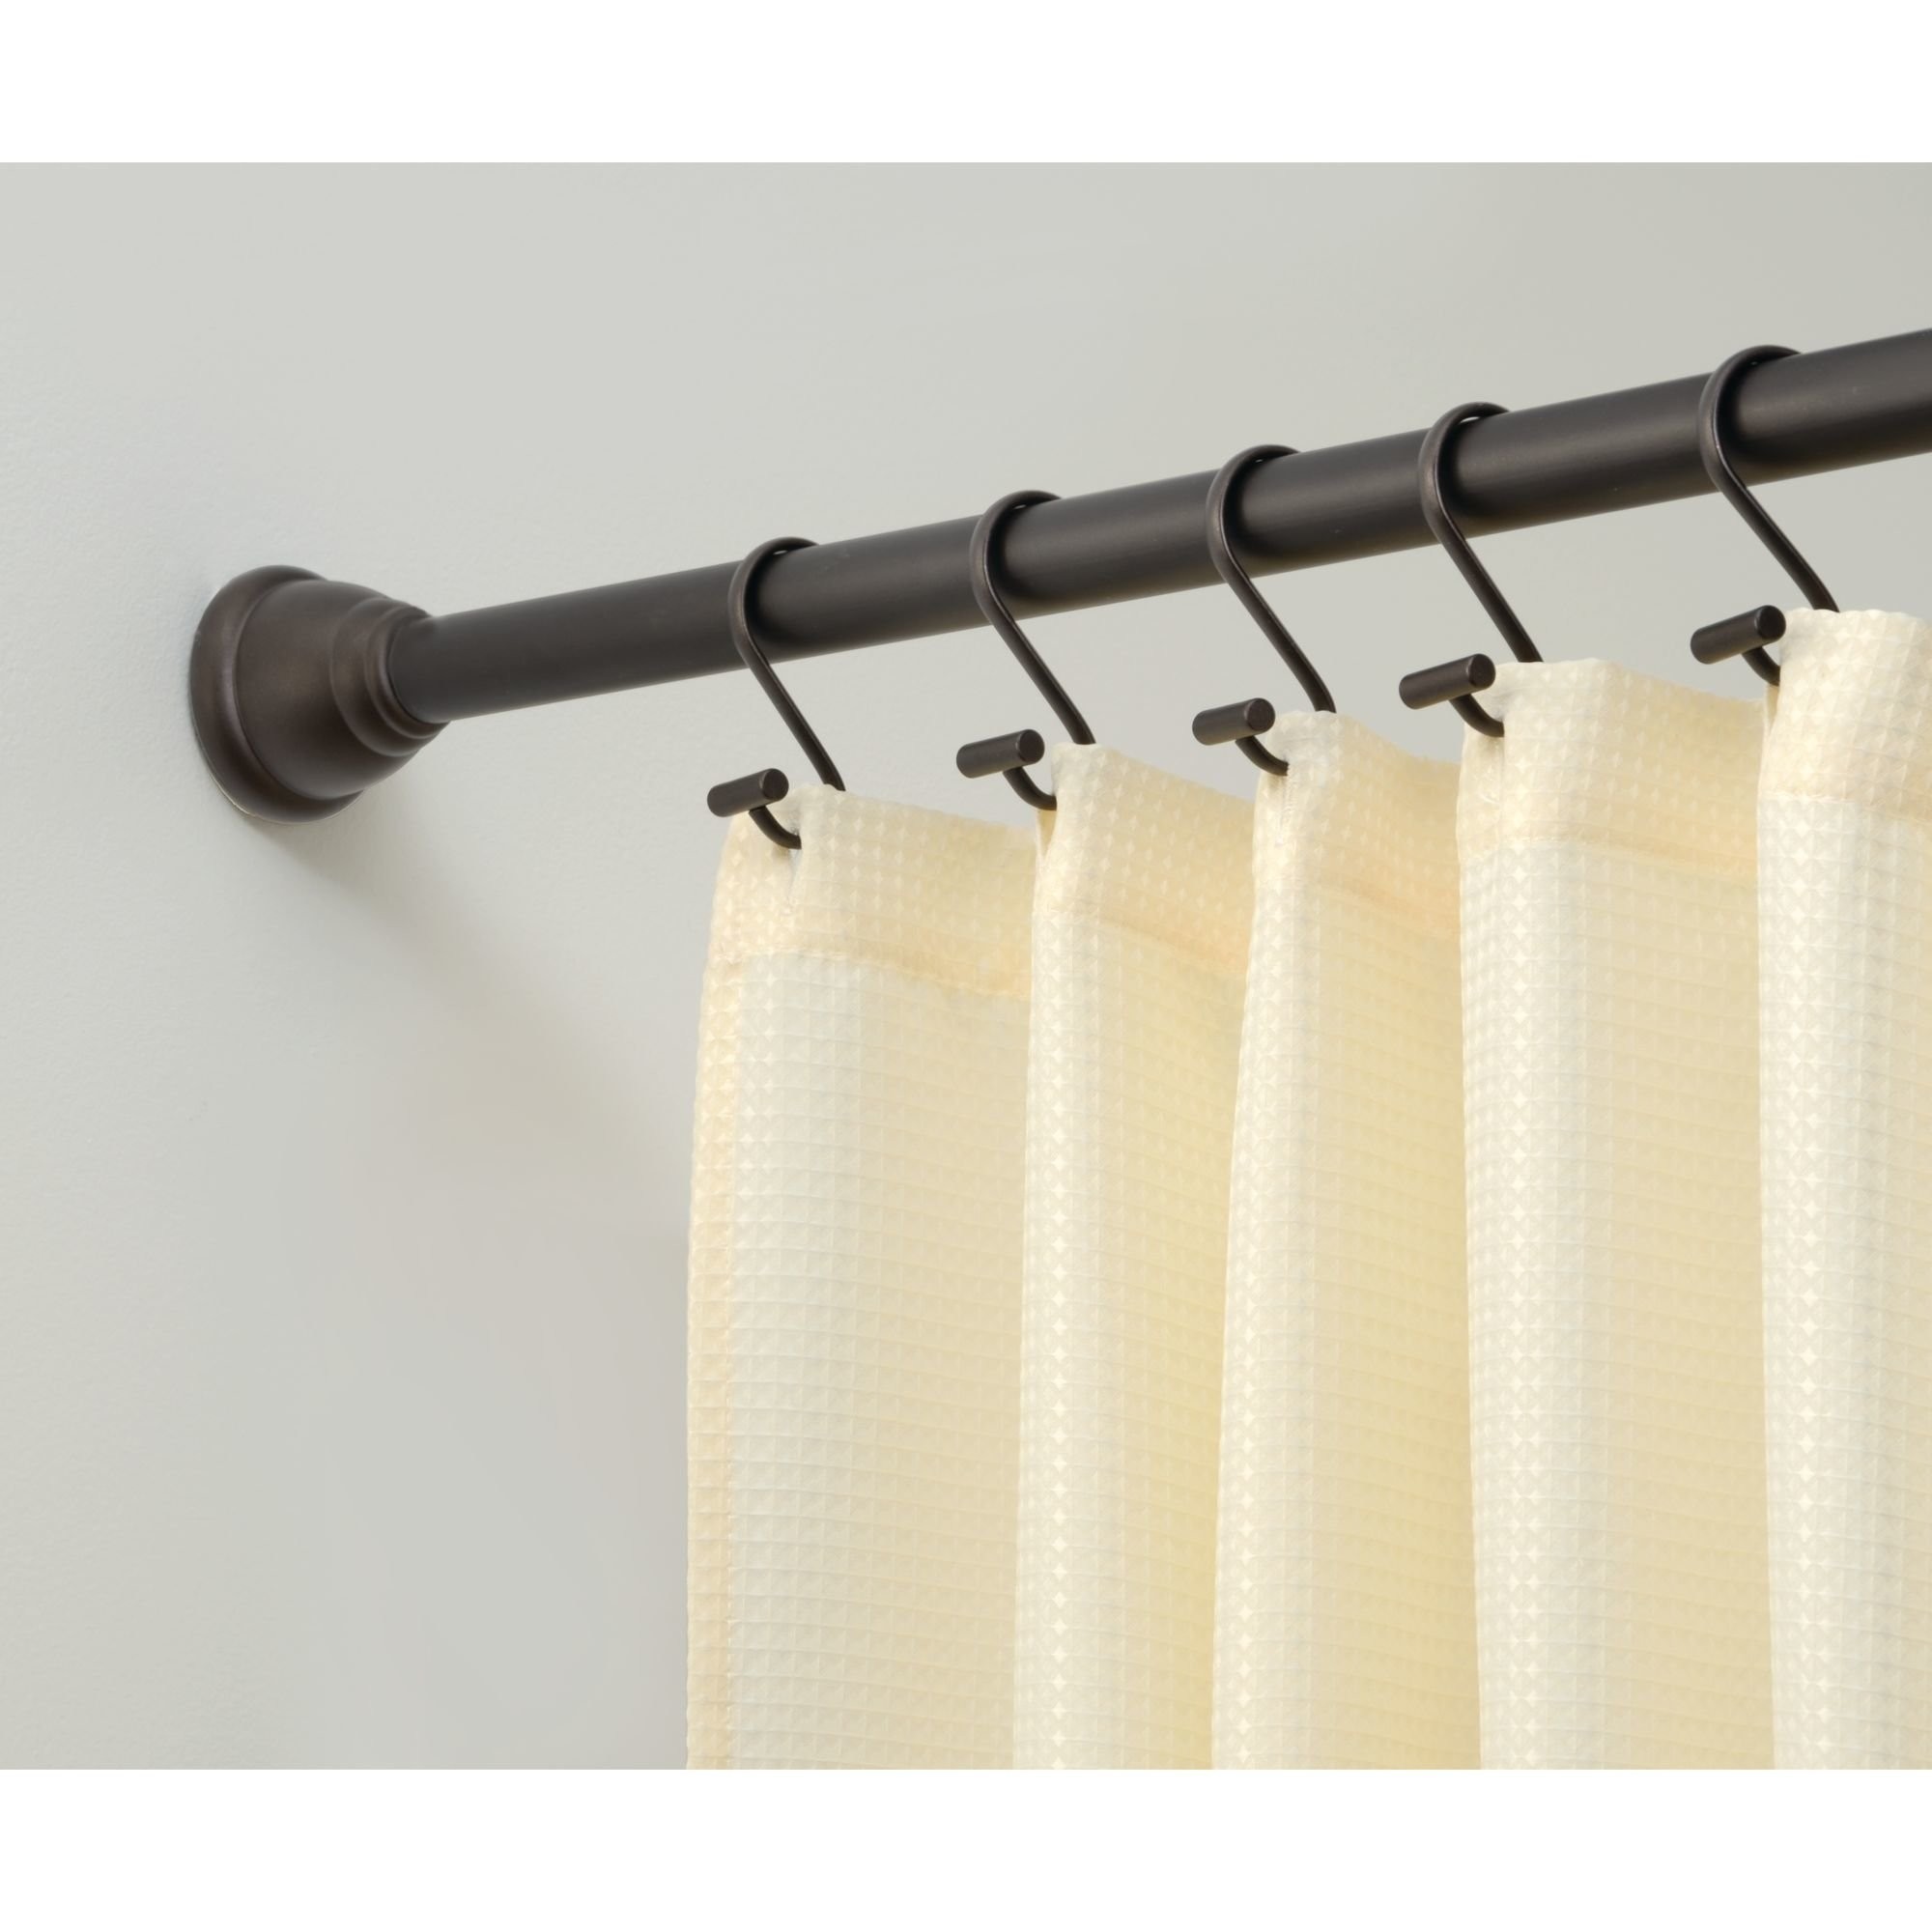 Cameo XT 75" Adjustable Straight Tension Shower Curtain Rod